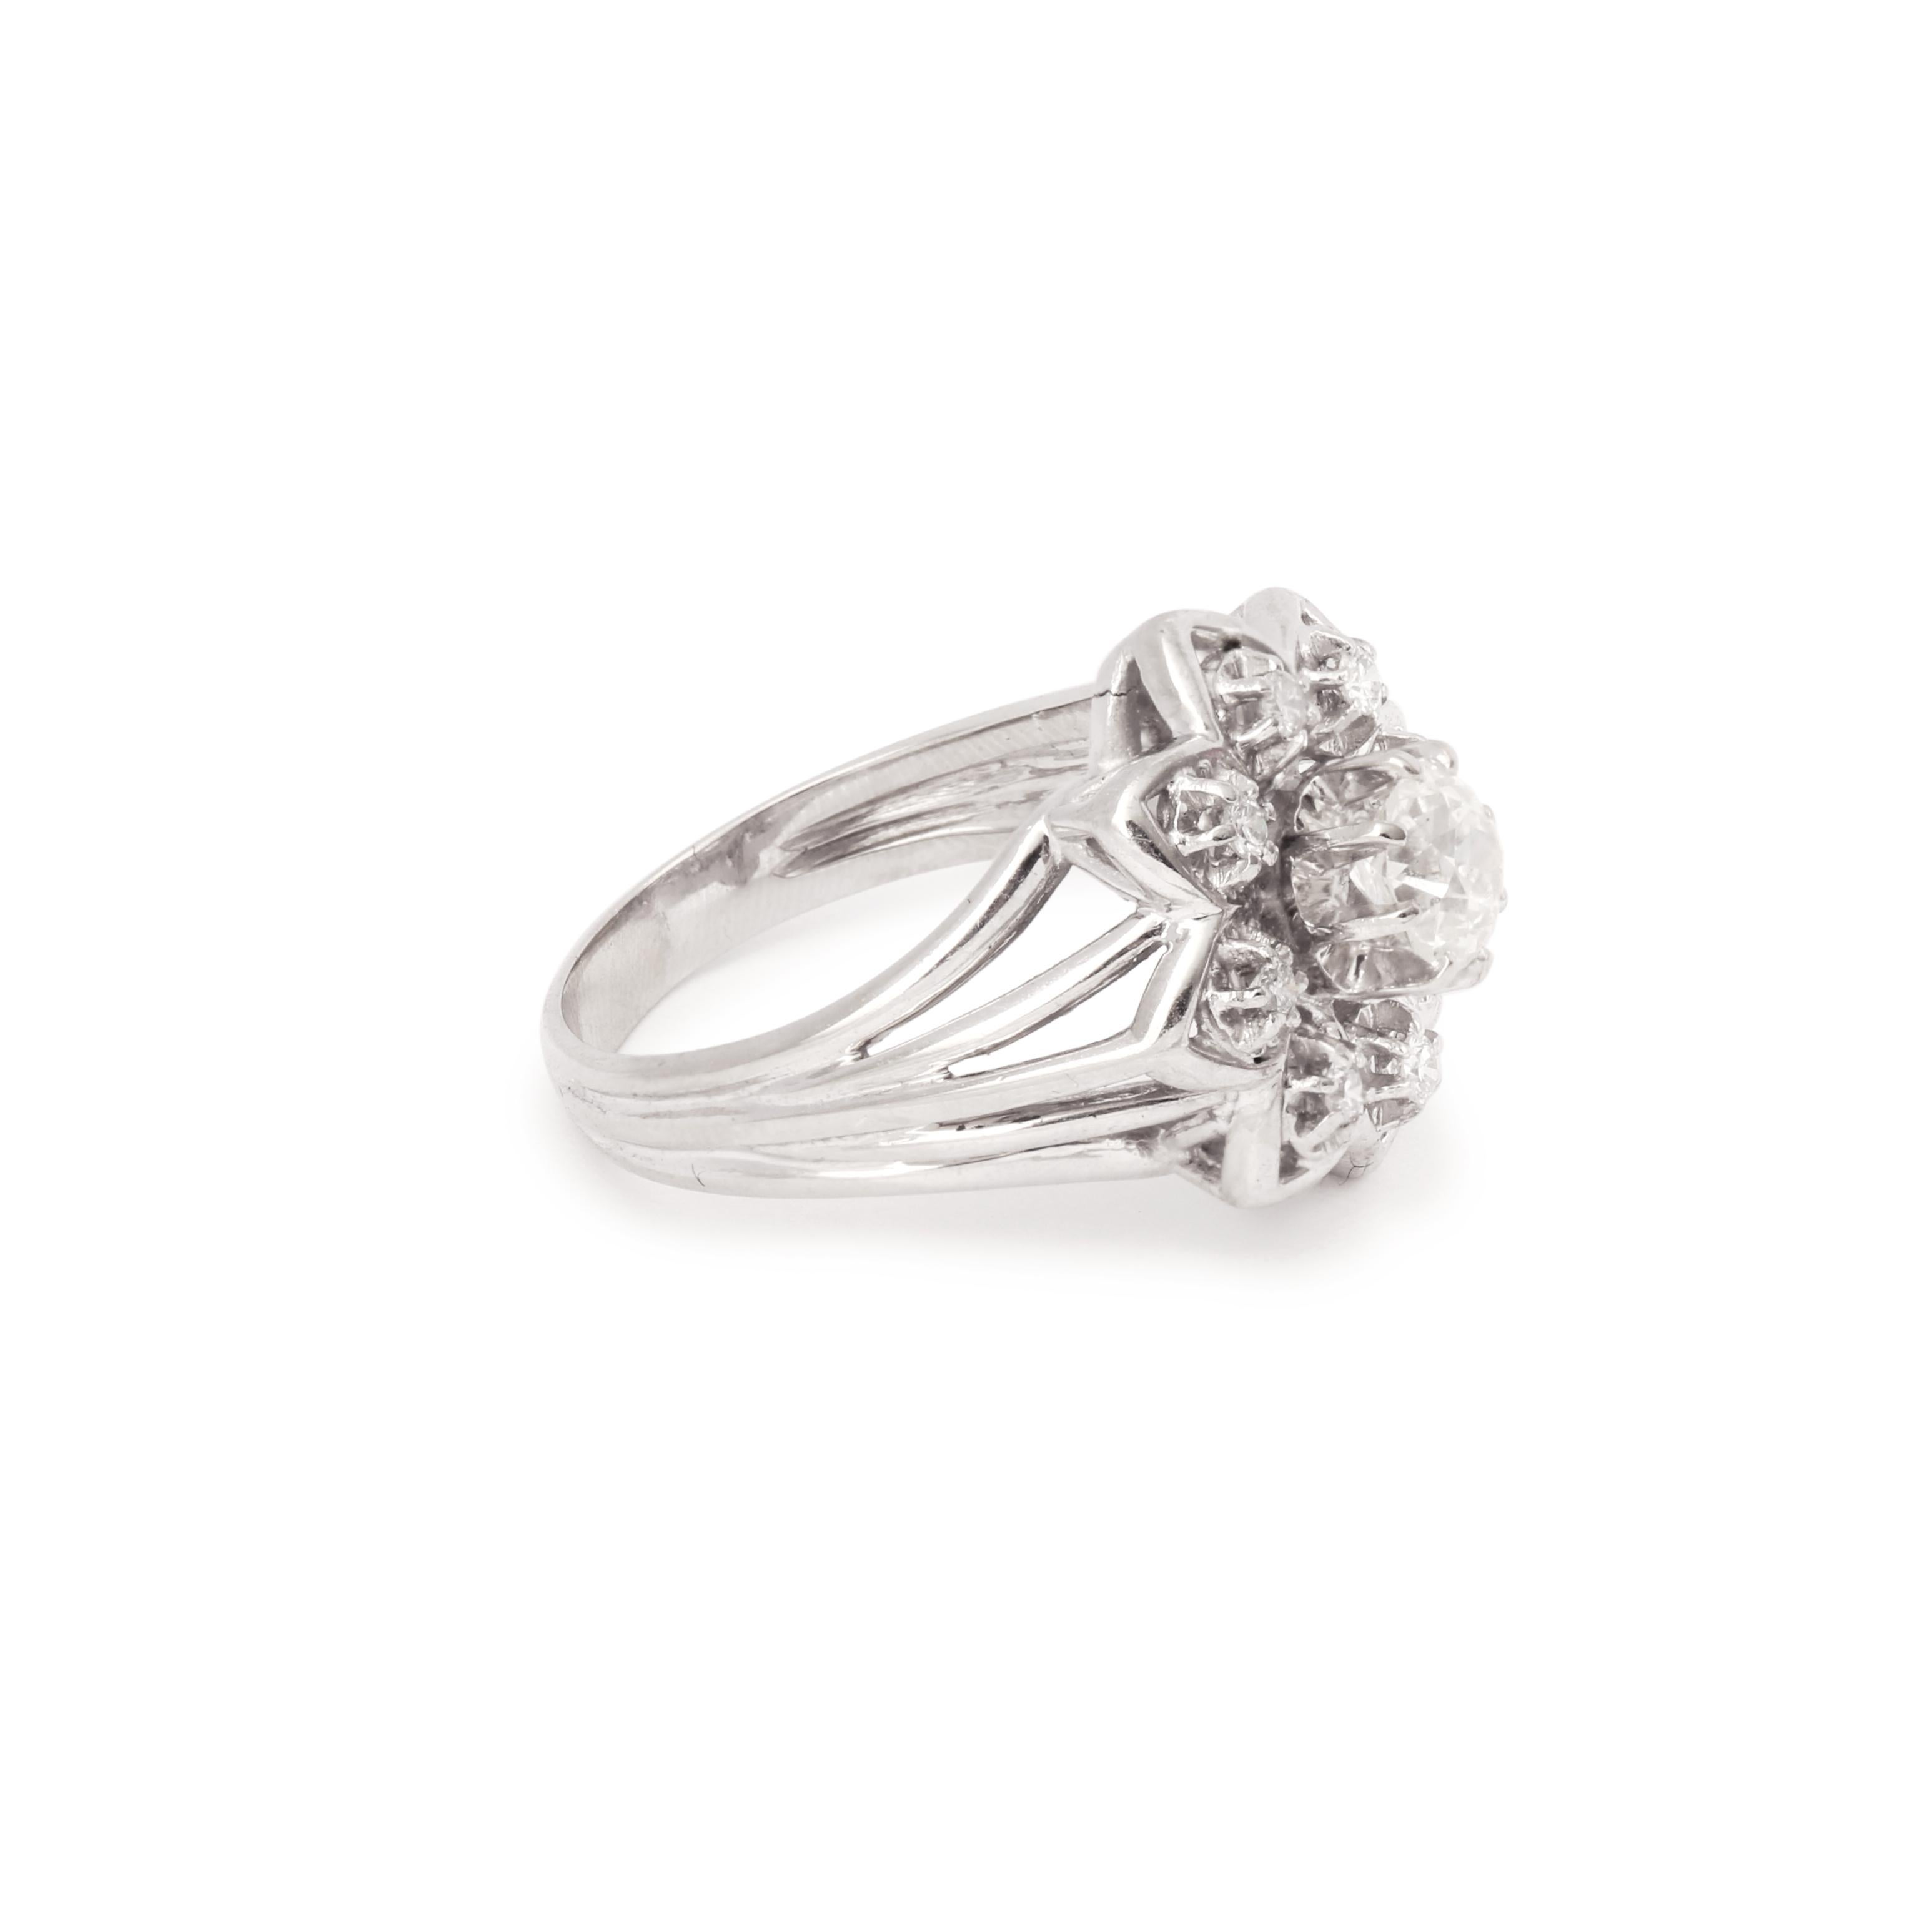 Magnificent daisy ring in white gold and platinum set with brilliant-cut diamonds and a central old-cut diamond.

Estimated weight of the central diamond : 0.90 carats

Total estimated weight of petal diamonds: 0.25 carats

Dimensions : 17.47 x